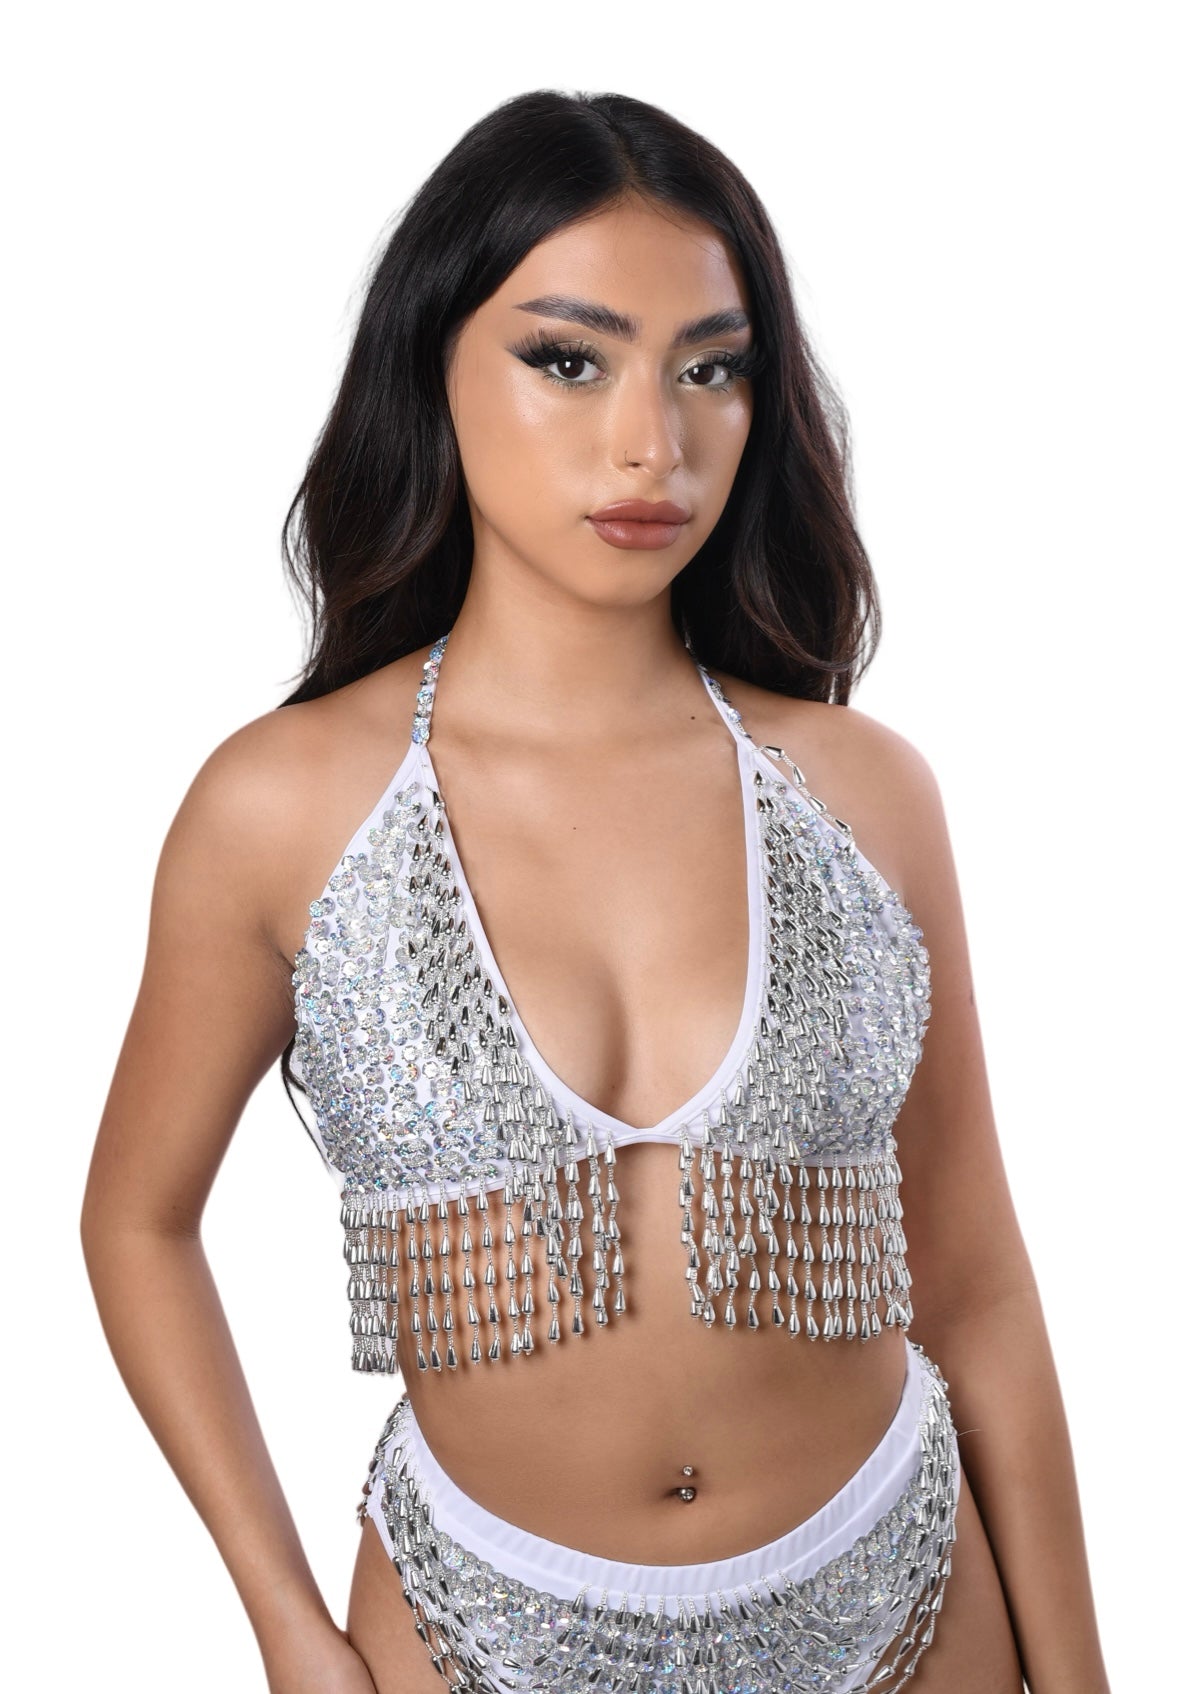 Hand Stitched Sequin Bra Top - Moonlight Rave clothes,rave outfits